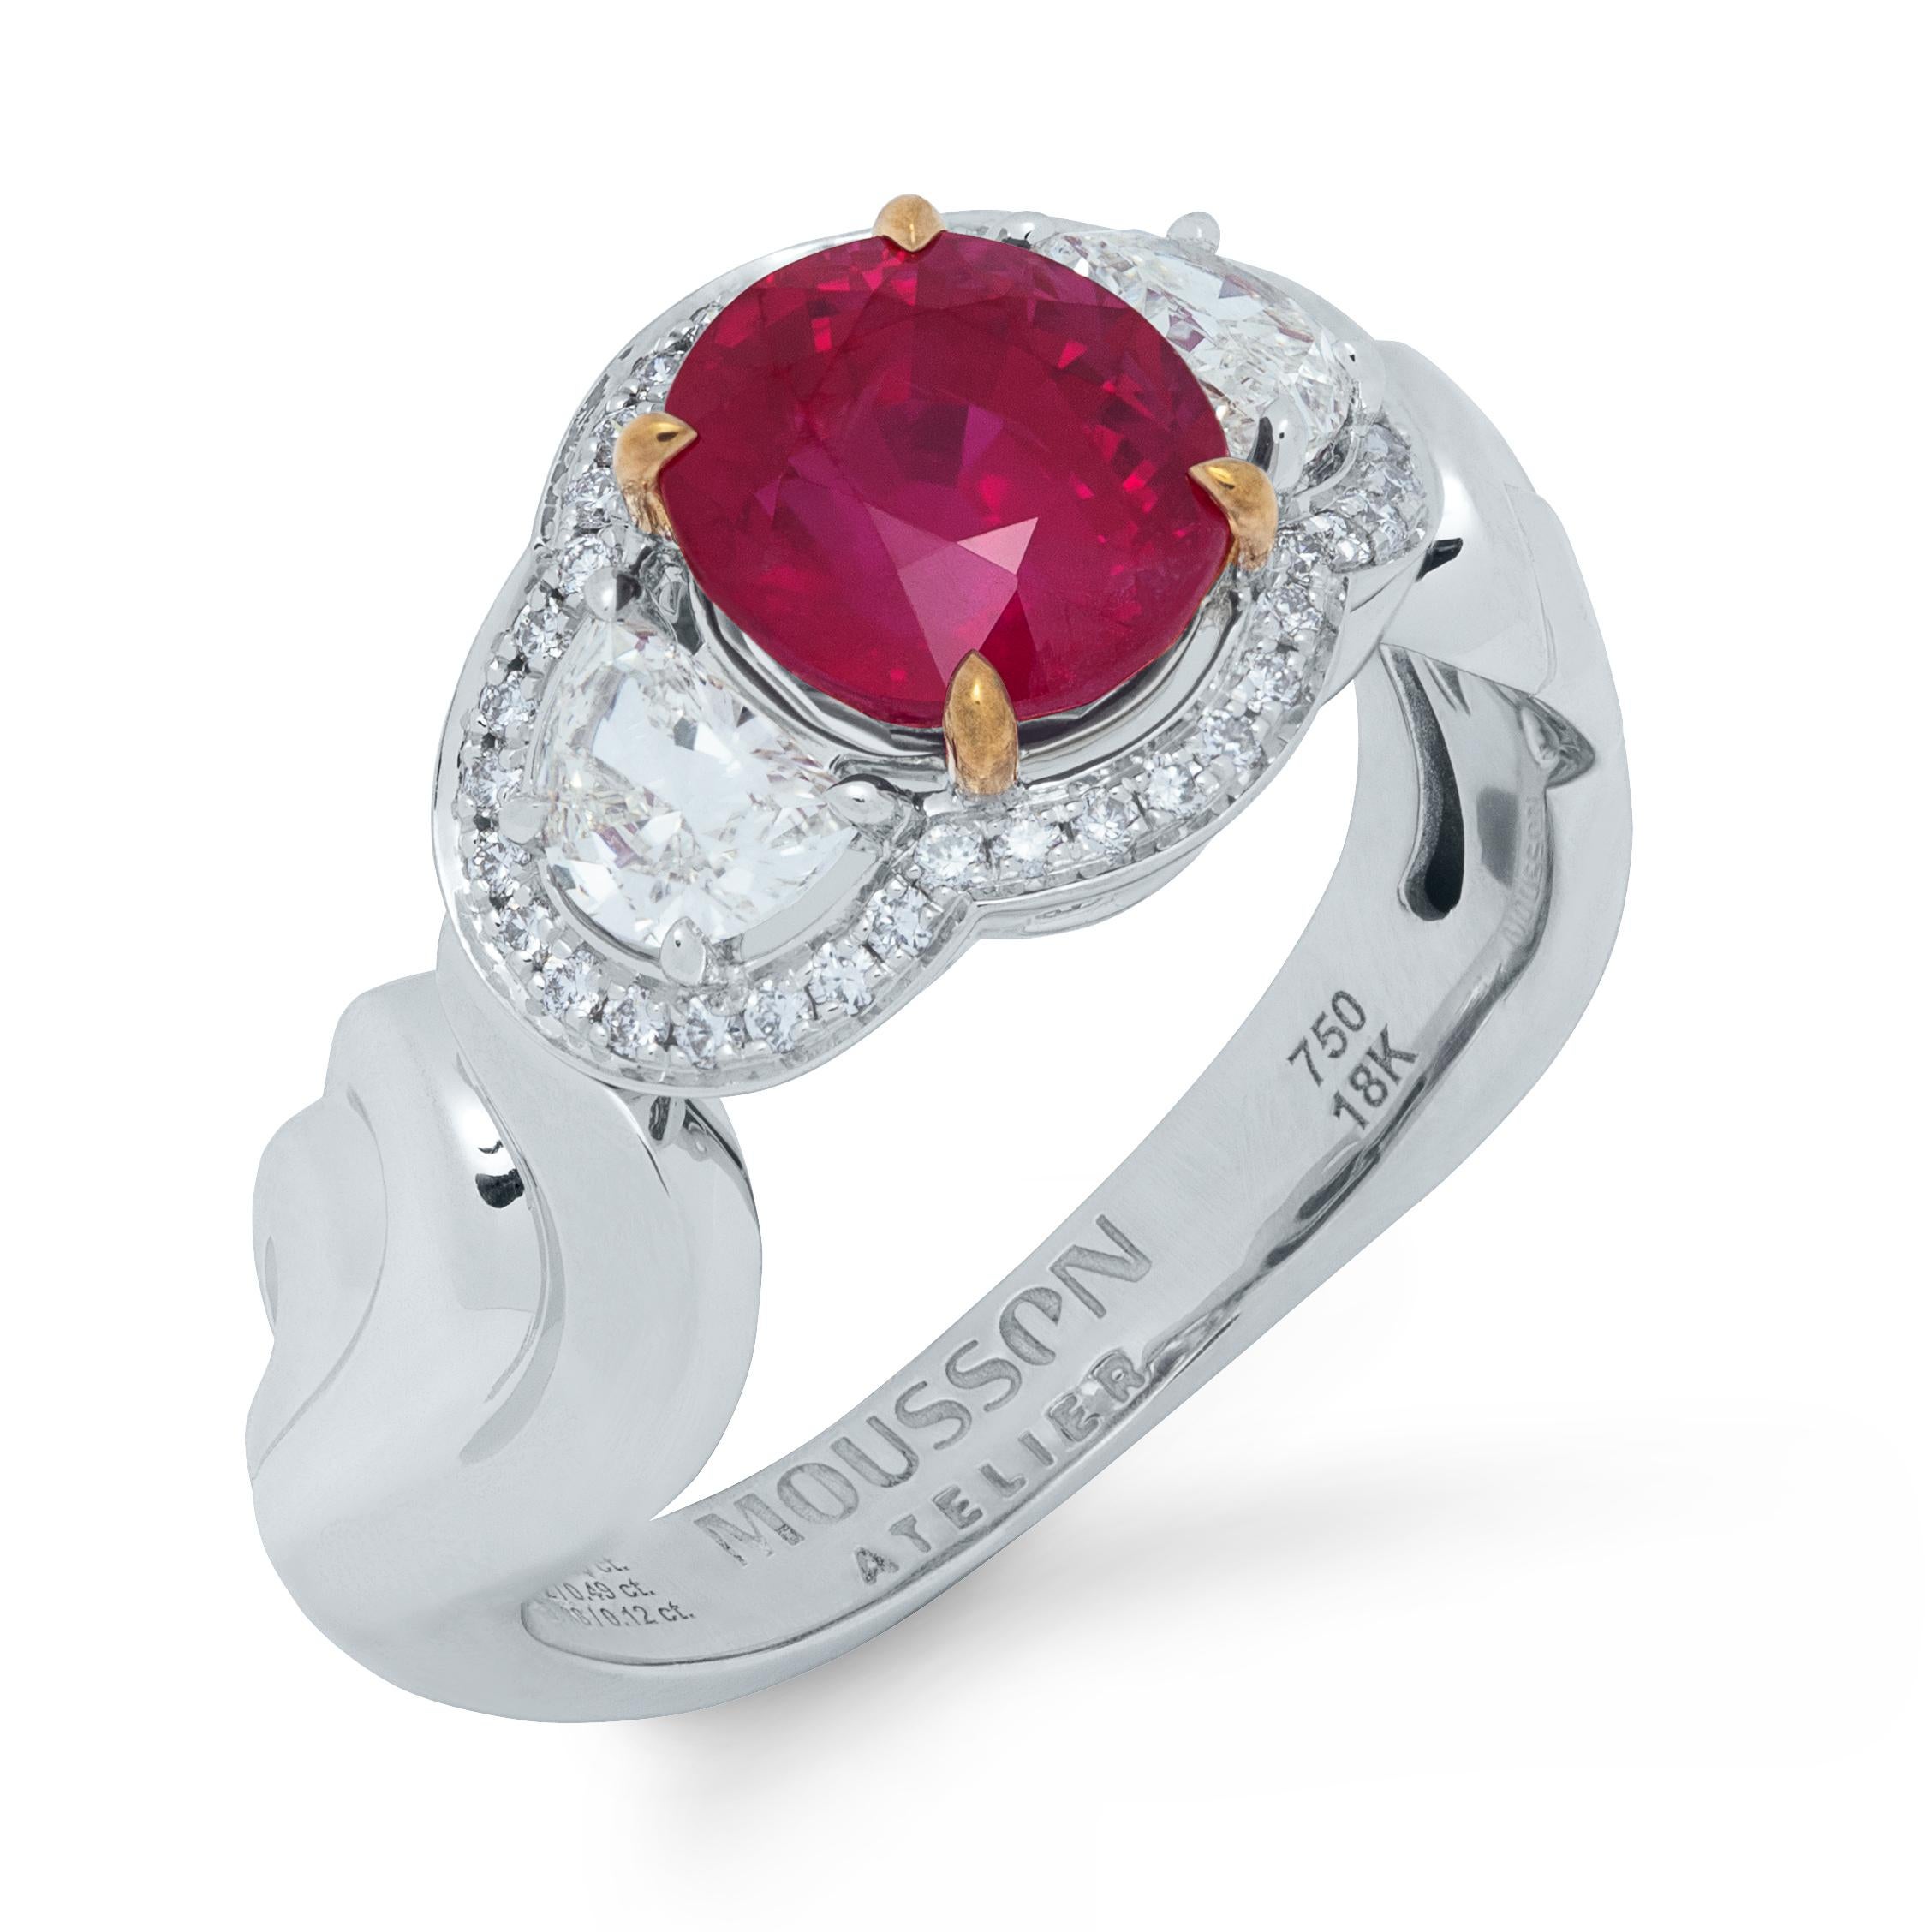 AIGS Certified 2.26 Carat Burmese Ruby Diamond 18 Karat White Gold Ring
Classic is always in fashion! But if the classic is supplemented with something original,  bring there some zest, their own unique style, then it will sparkle with new colors.